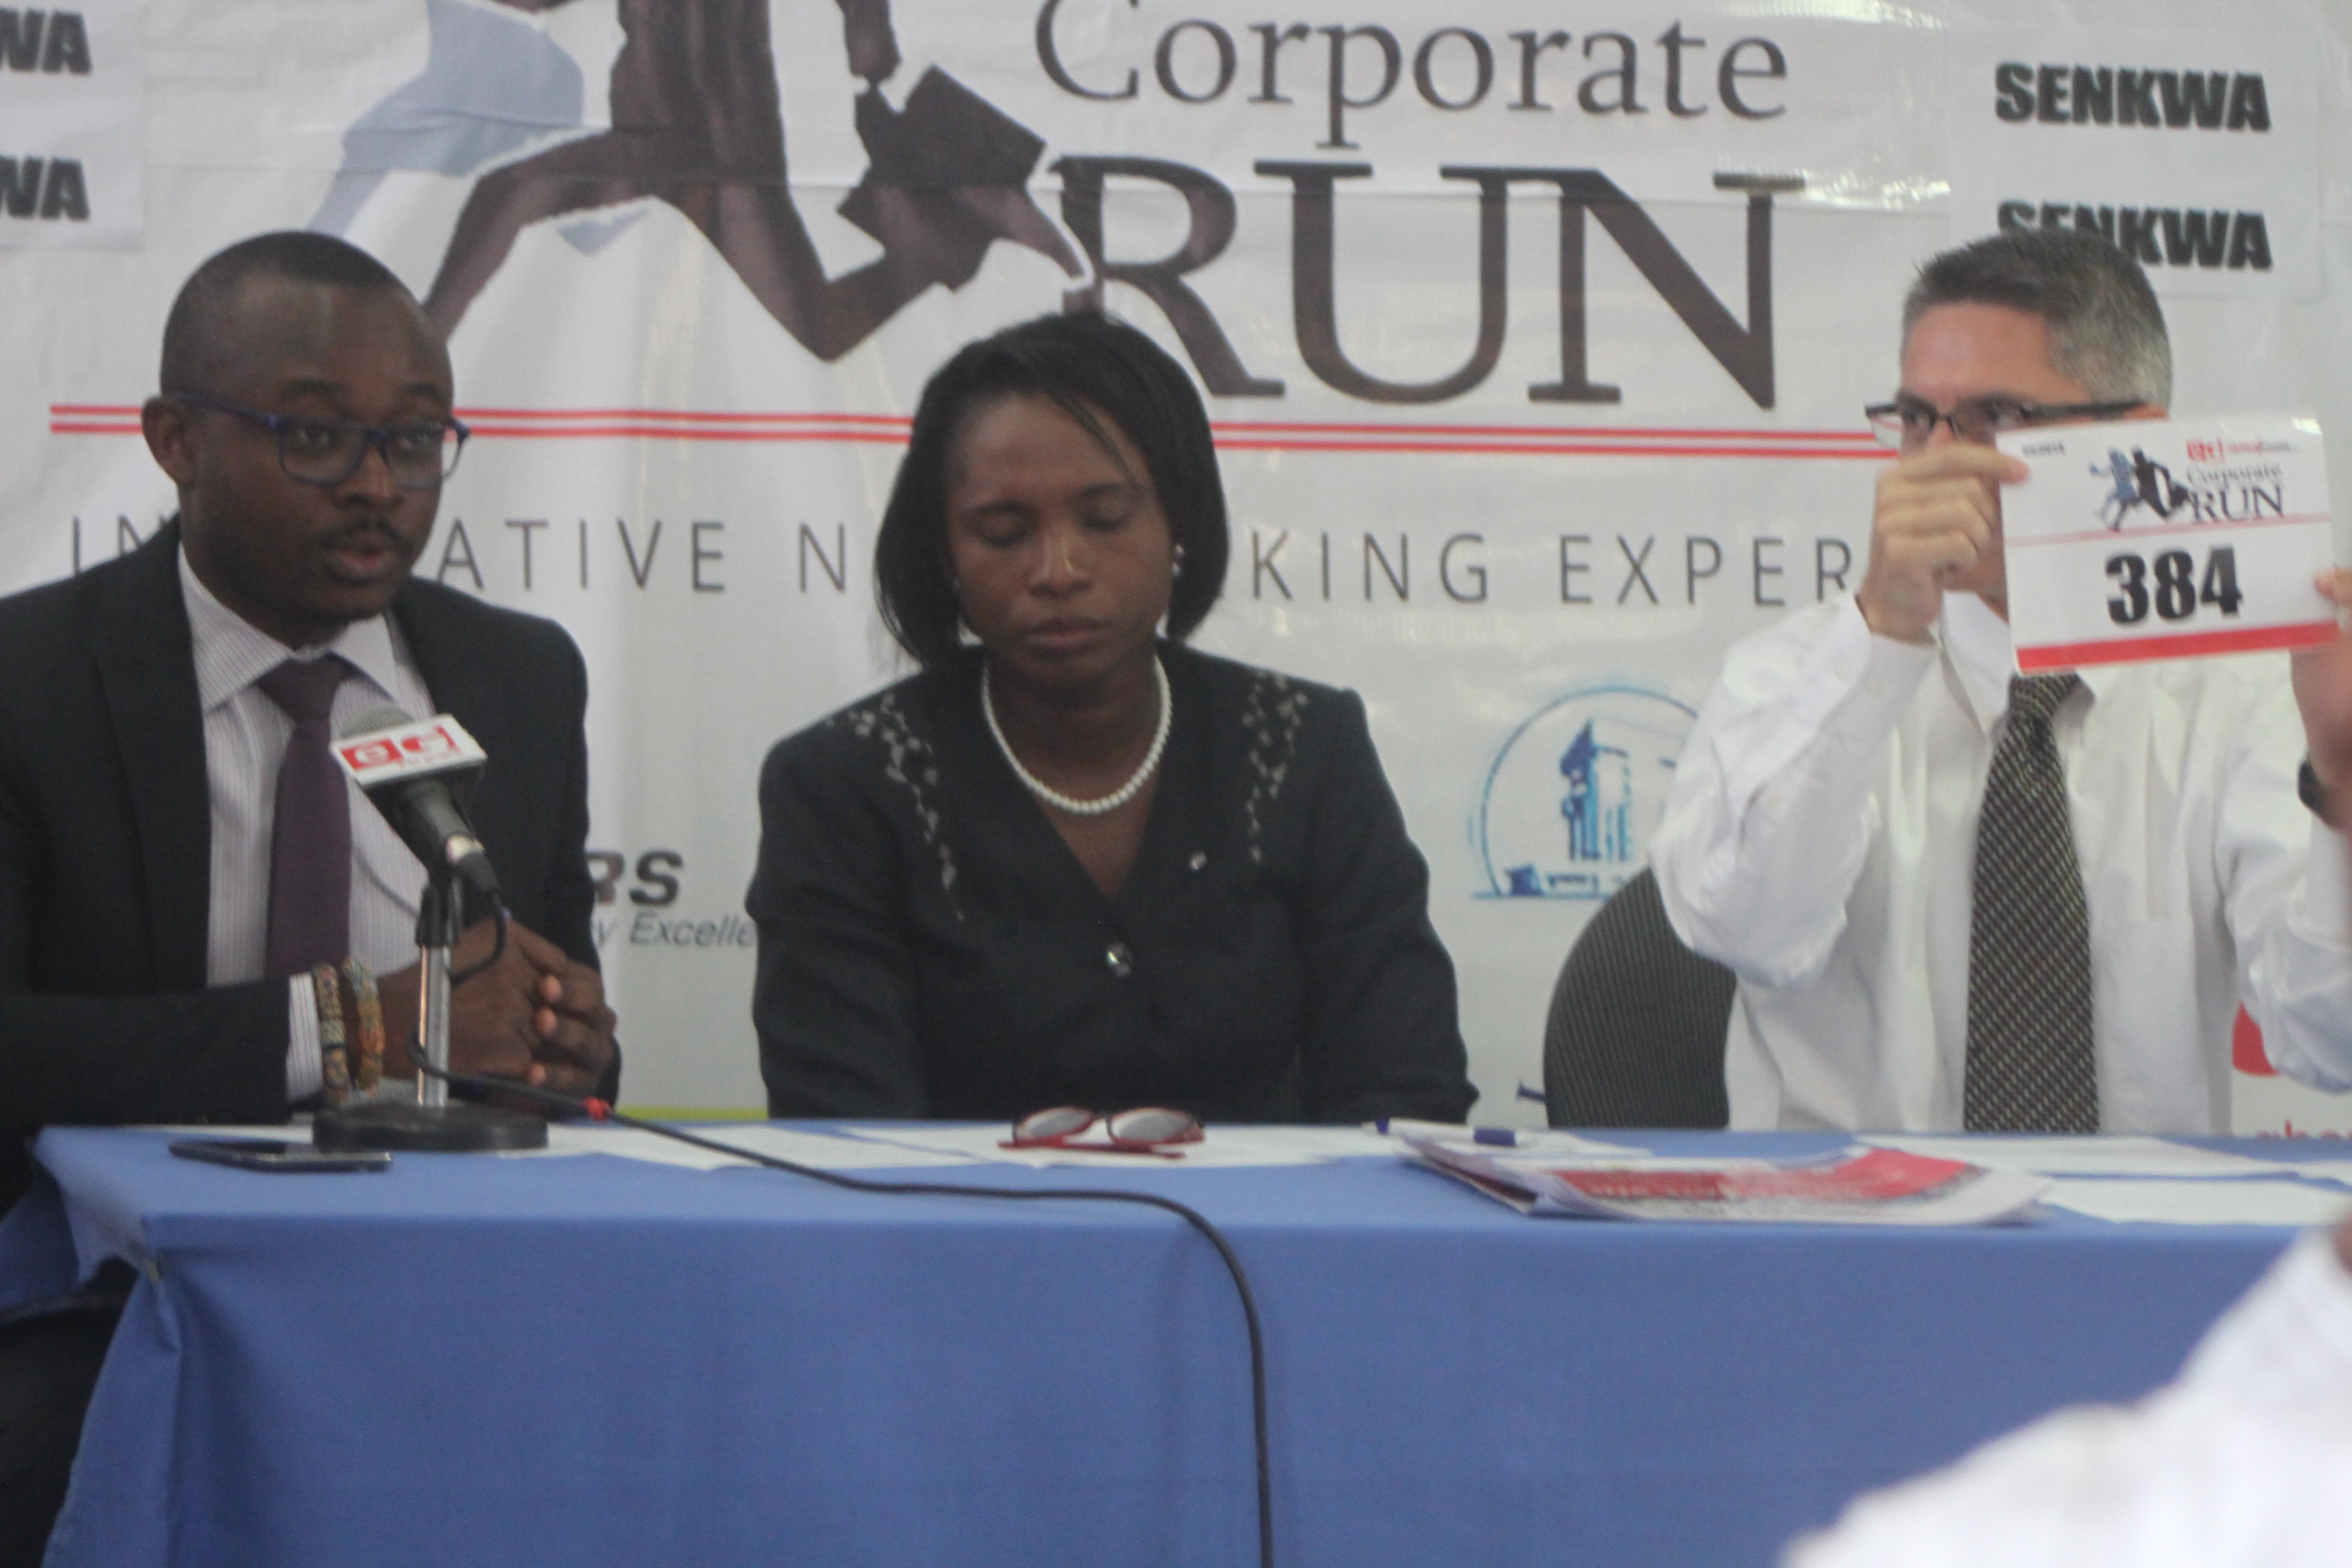 The Head of Brands Communication and Marketing of GMA, Kwame Gyan (far left) addressing Monday's launch